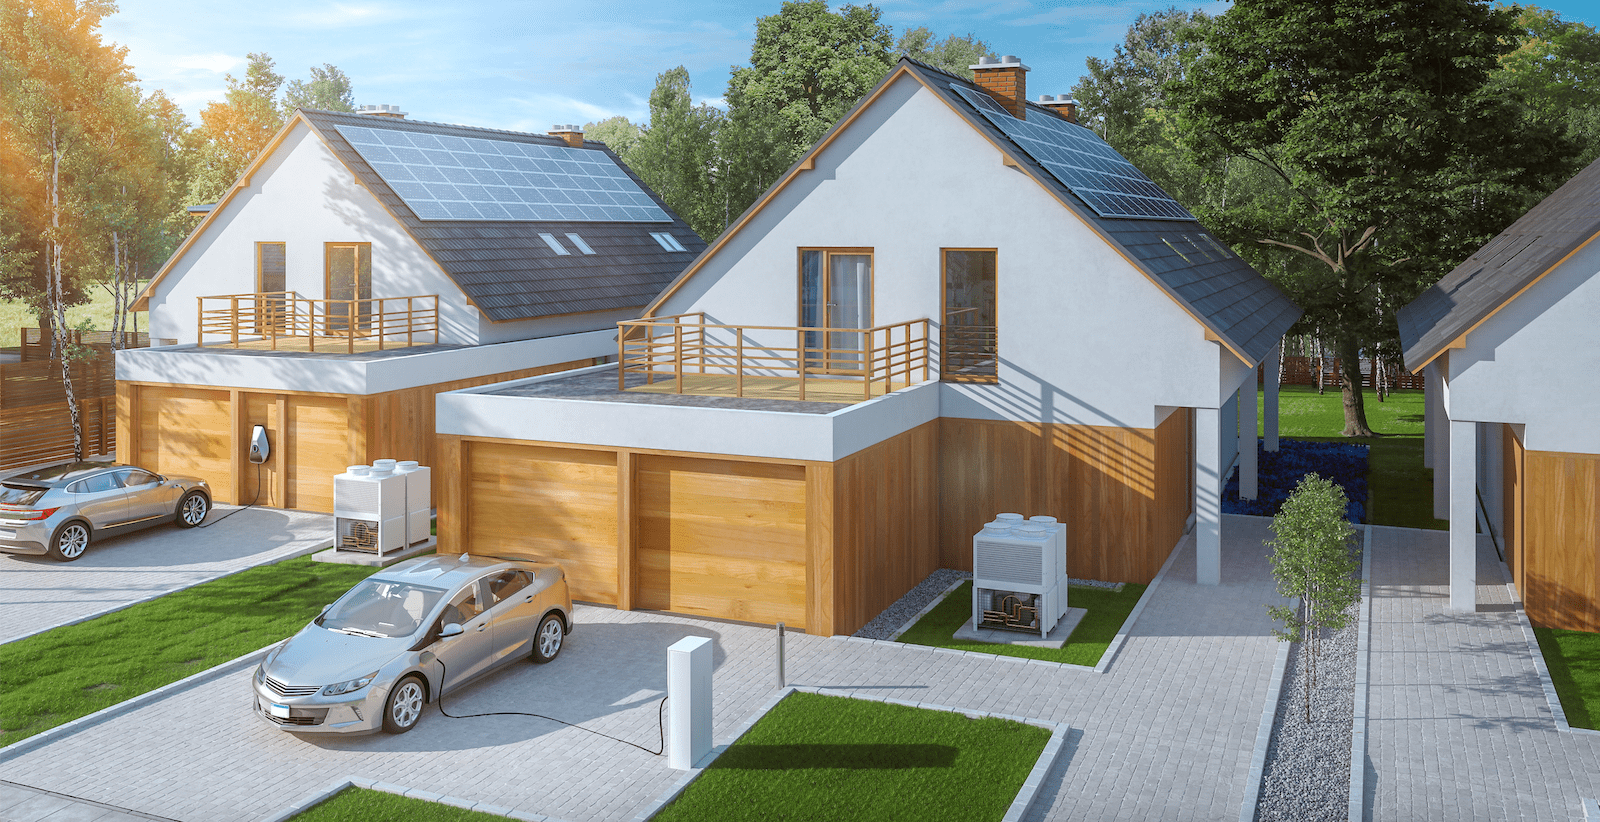 Energy code for building energy-efficient homes